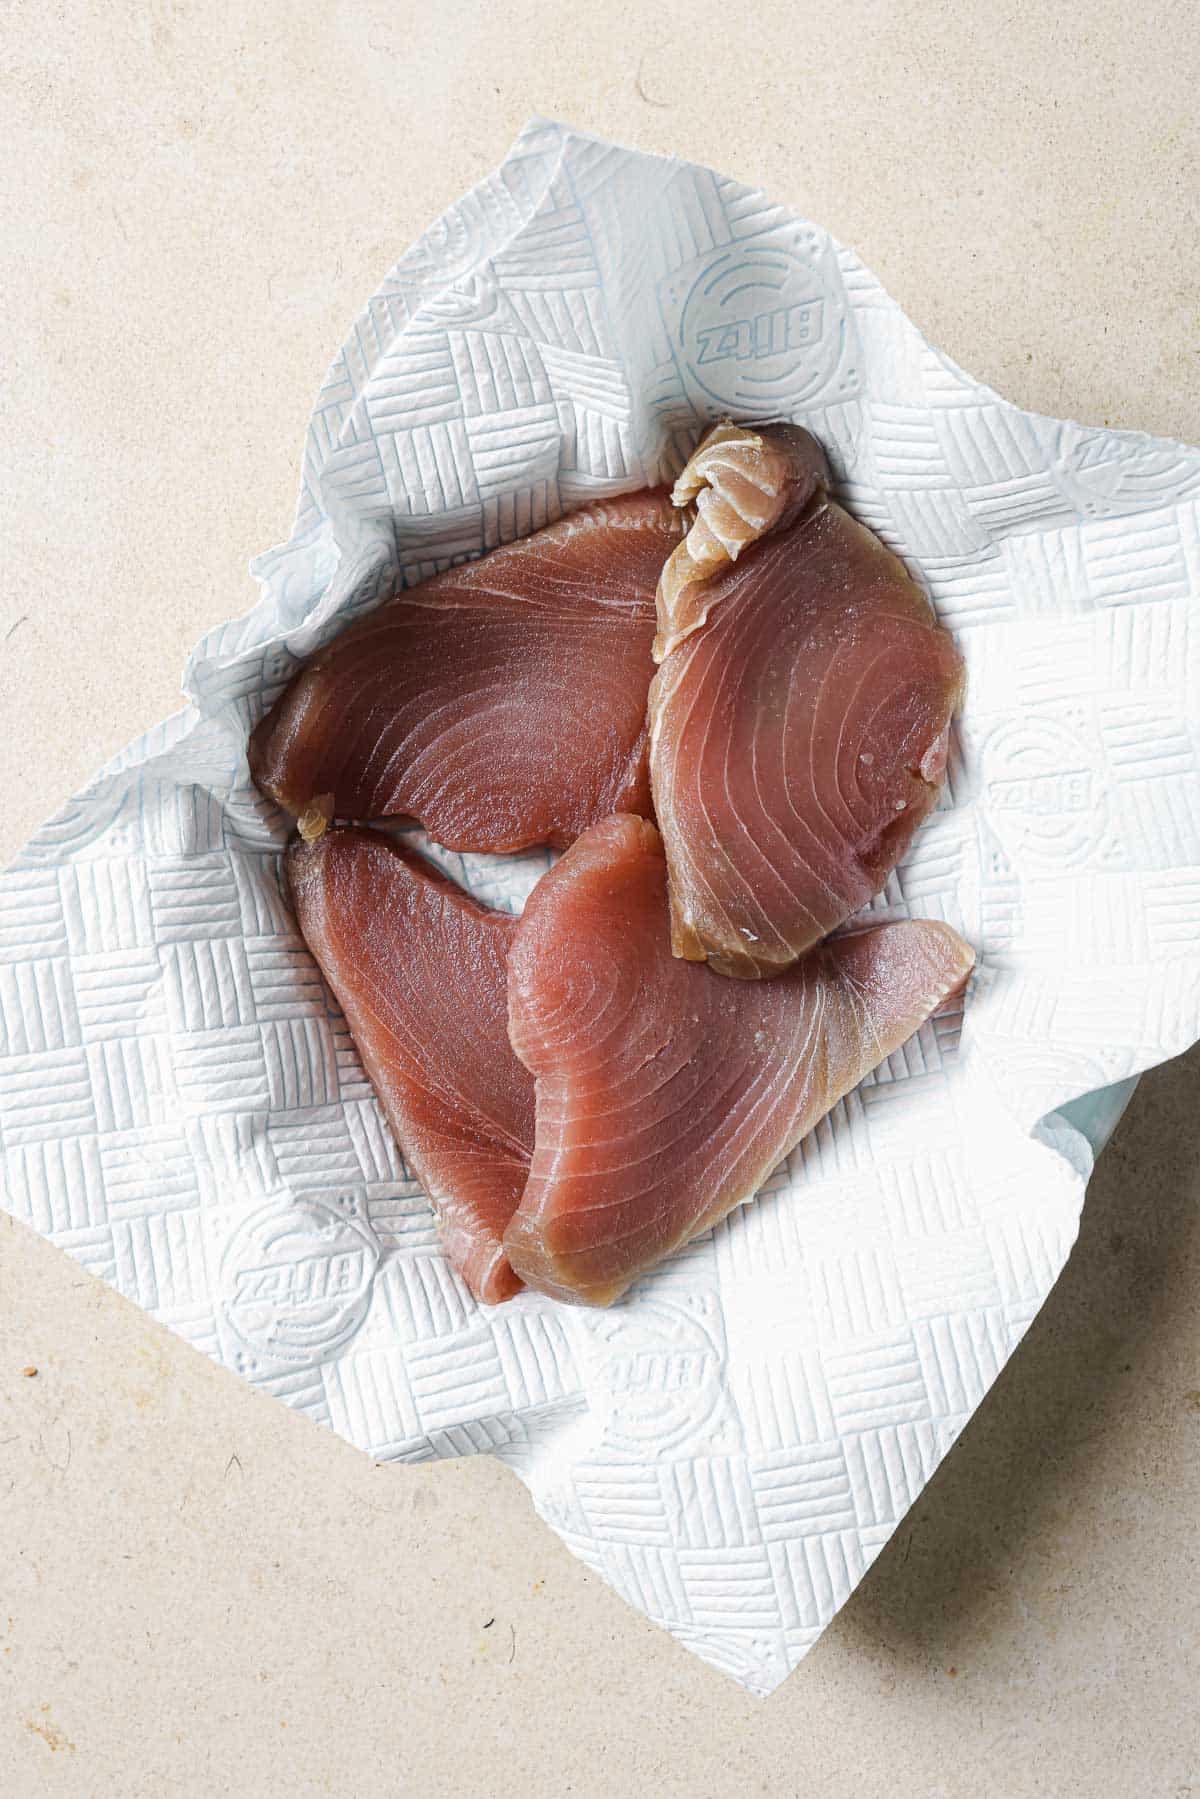 Tuna fillets are patted dry with paper towels.